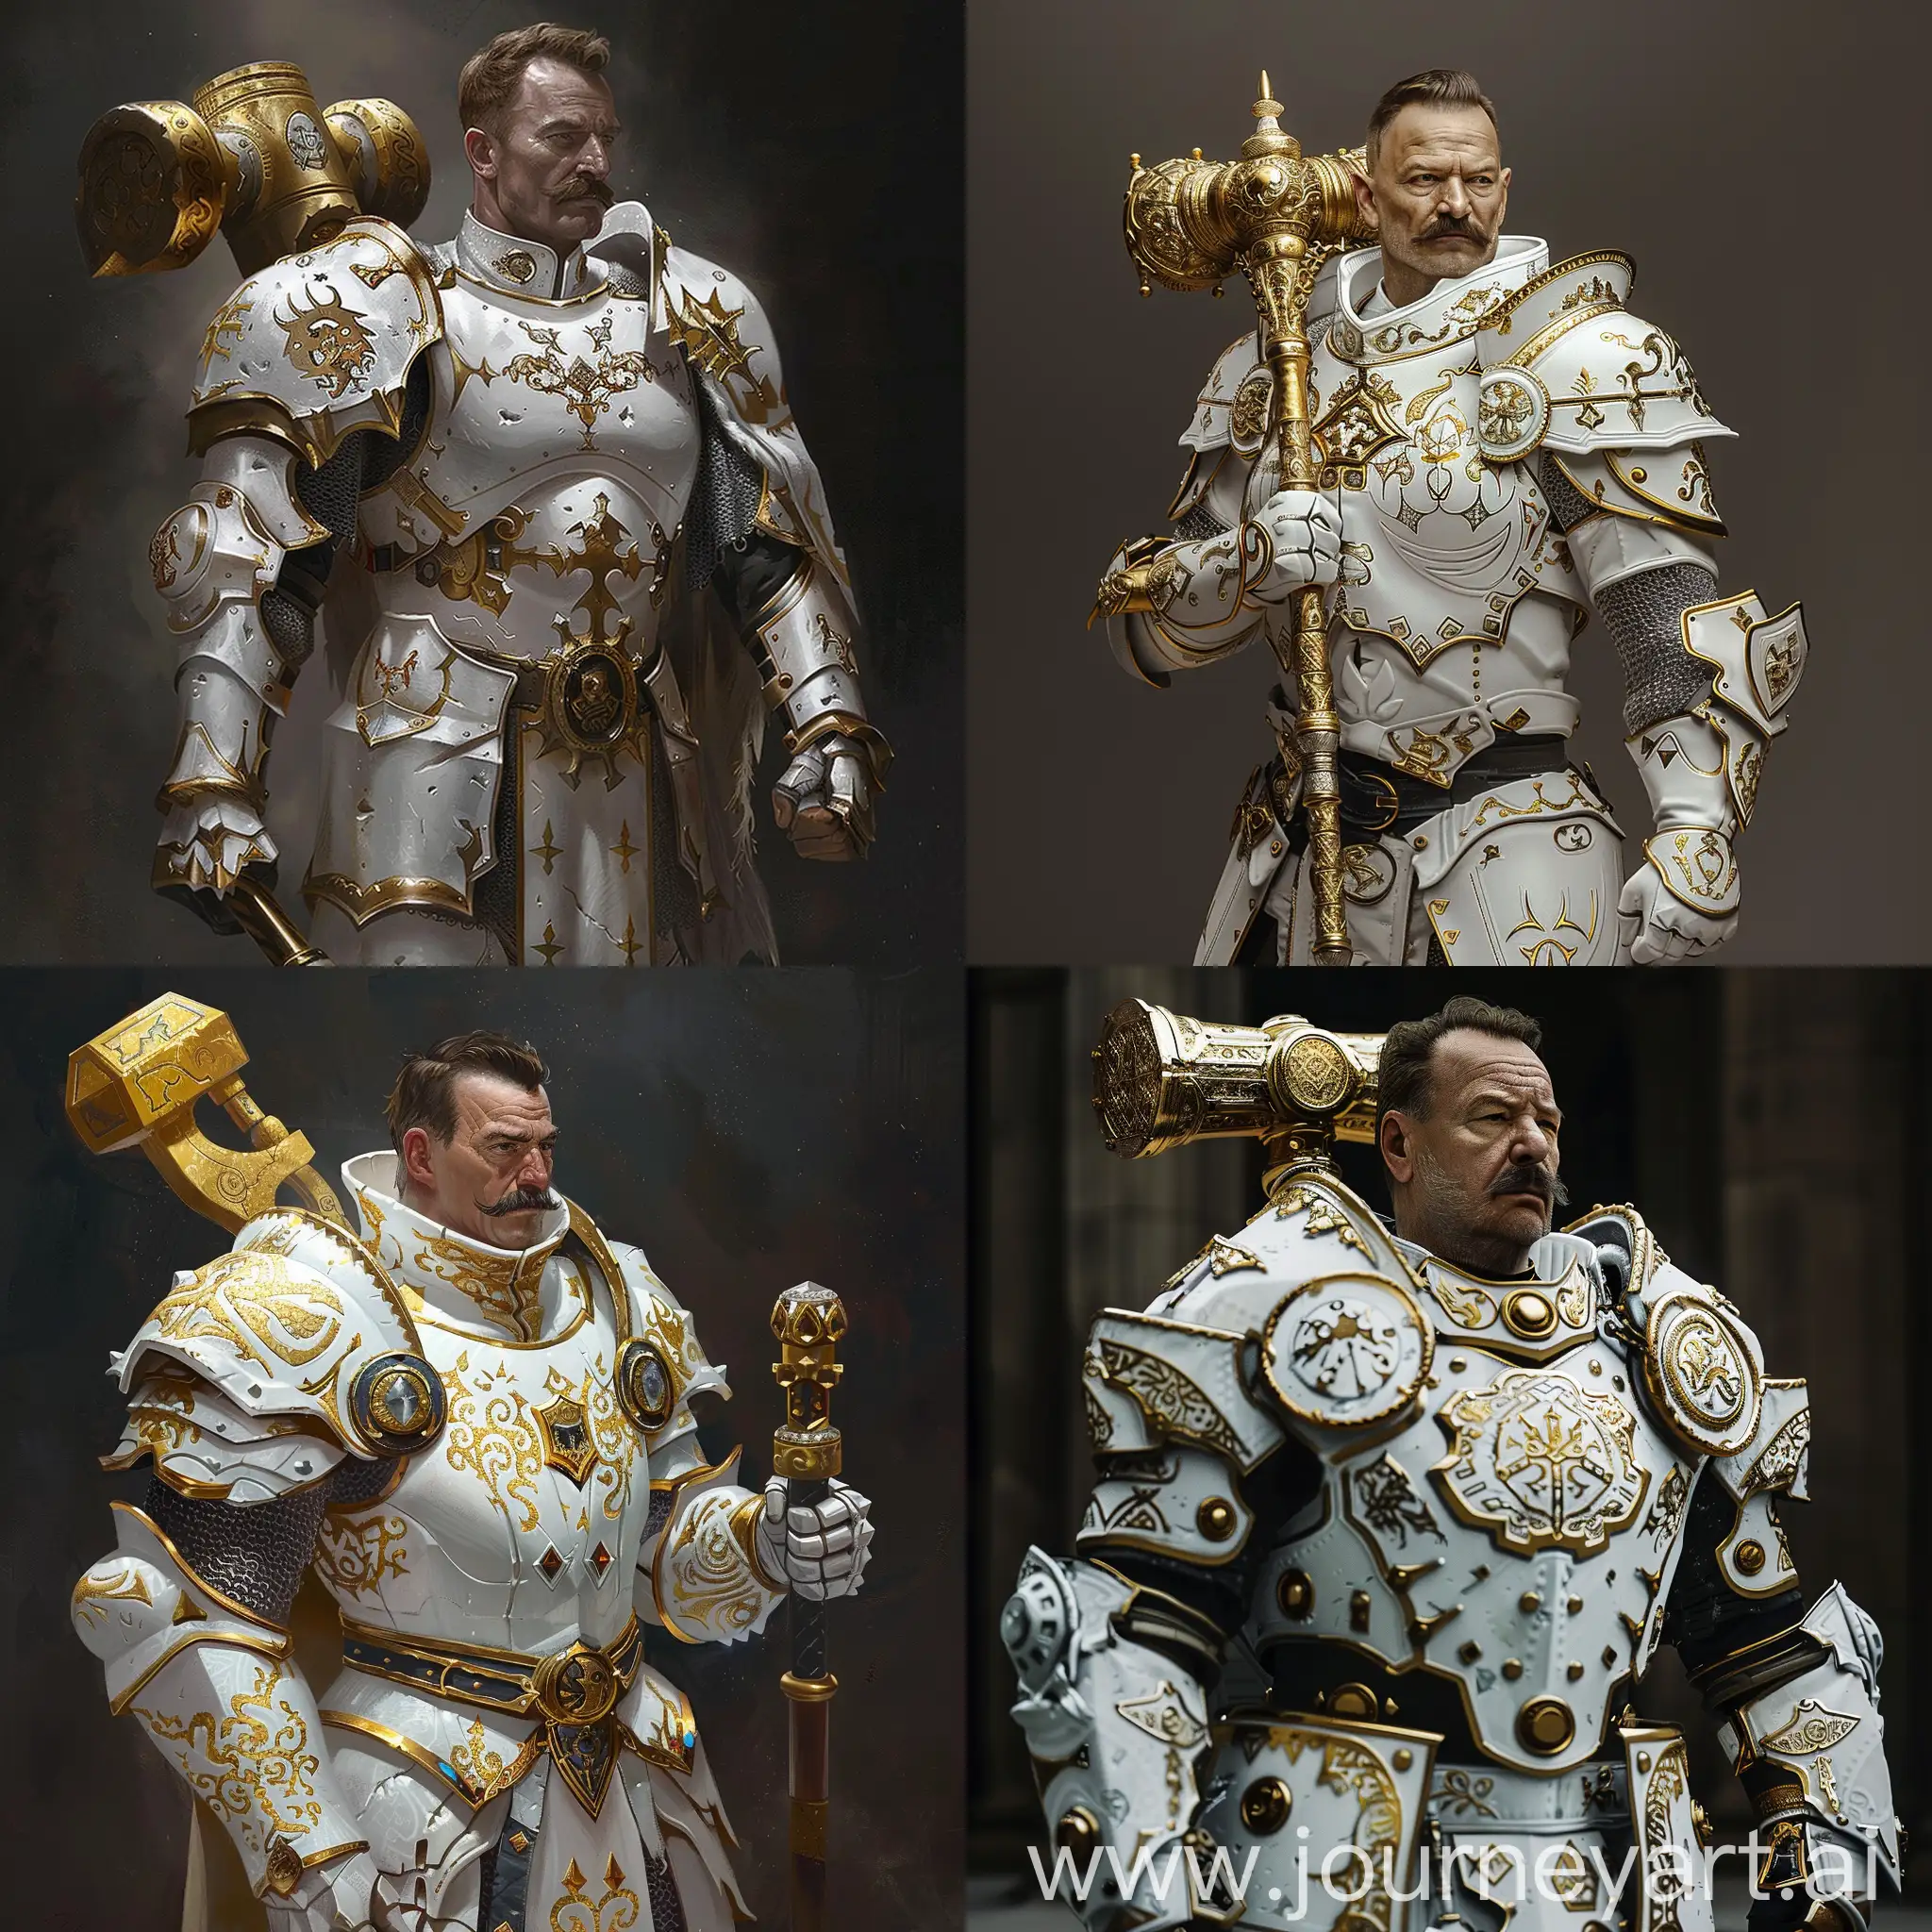 Middleaged-Male-Paladin-in-Ornate-Gold-Armor-with-Warhammer-Dark-Fantasy-Art